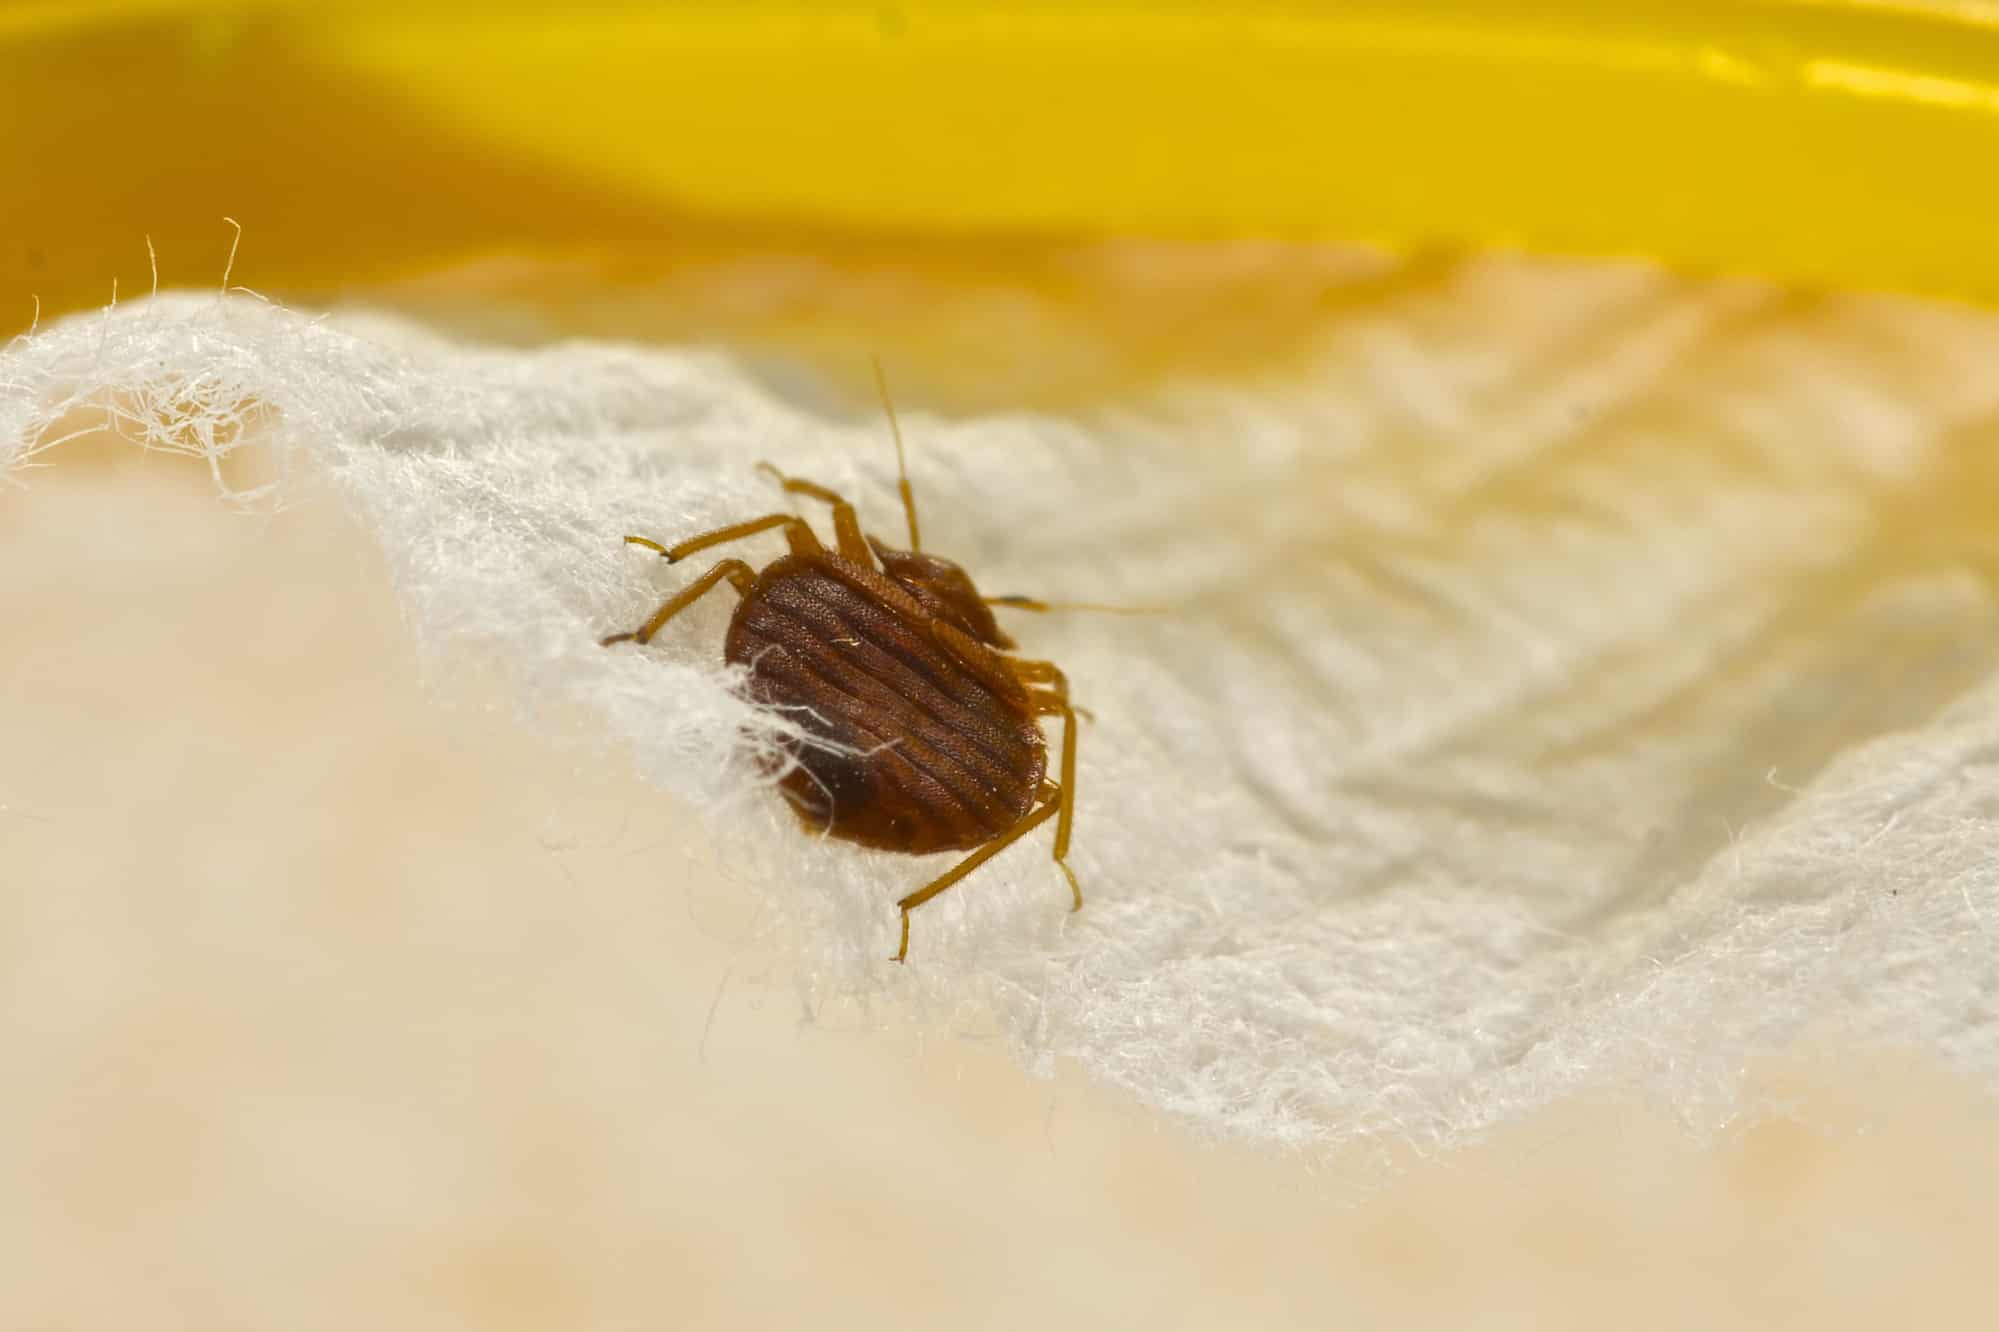 How to get rid of bed bugs in a mattress